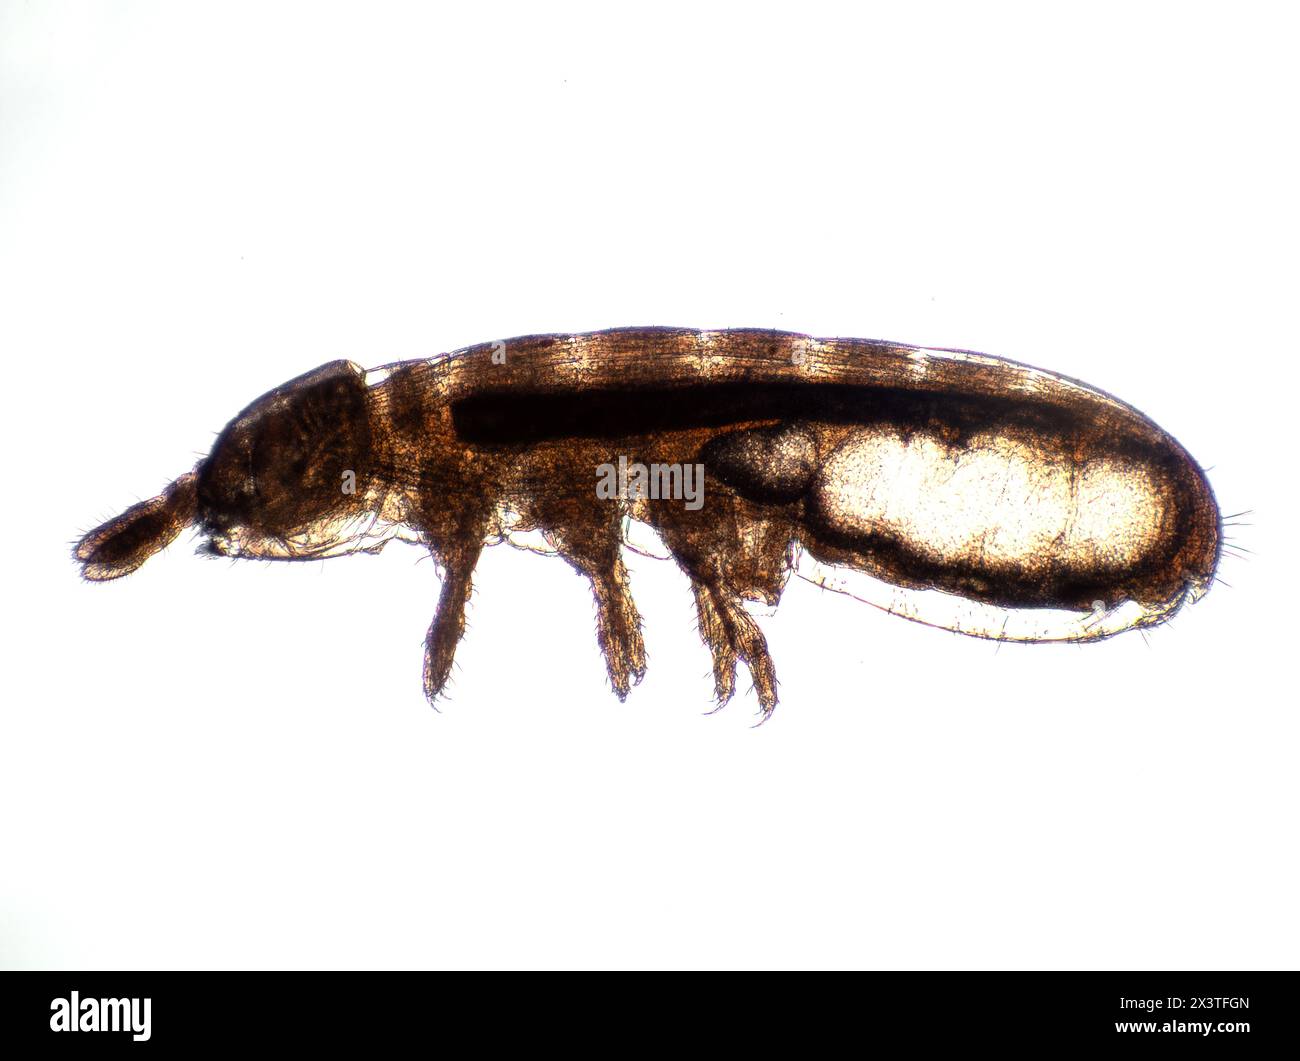 photomicrograph of the side view of a minute springtail (Collembola) showing its internal anatomy Stock Photo